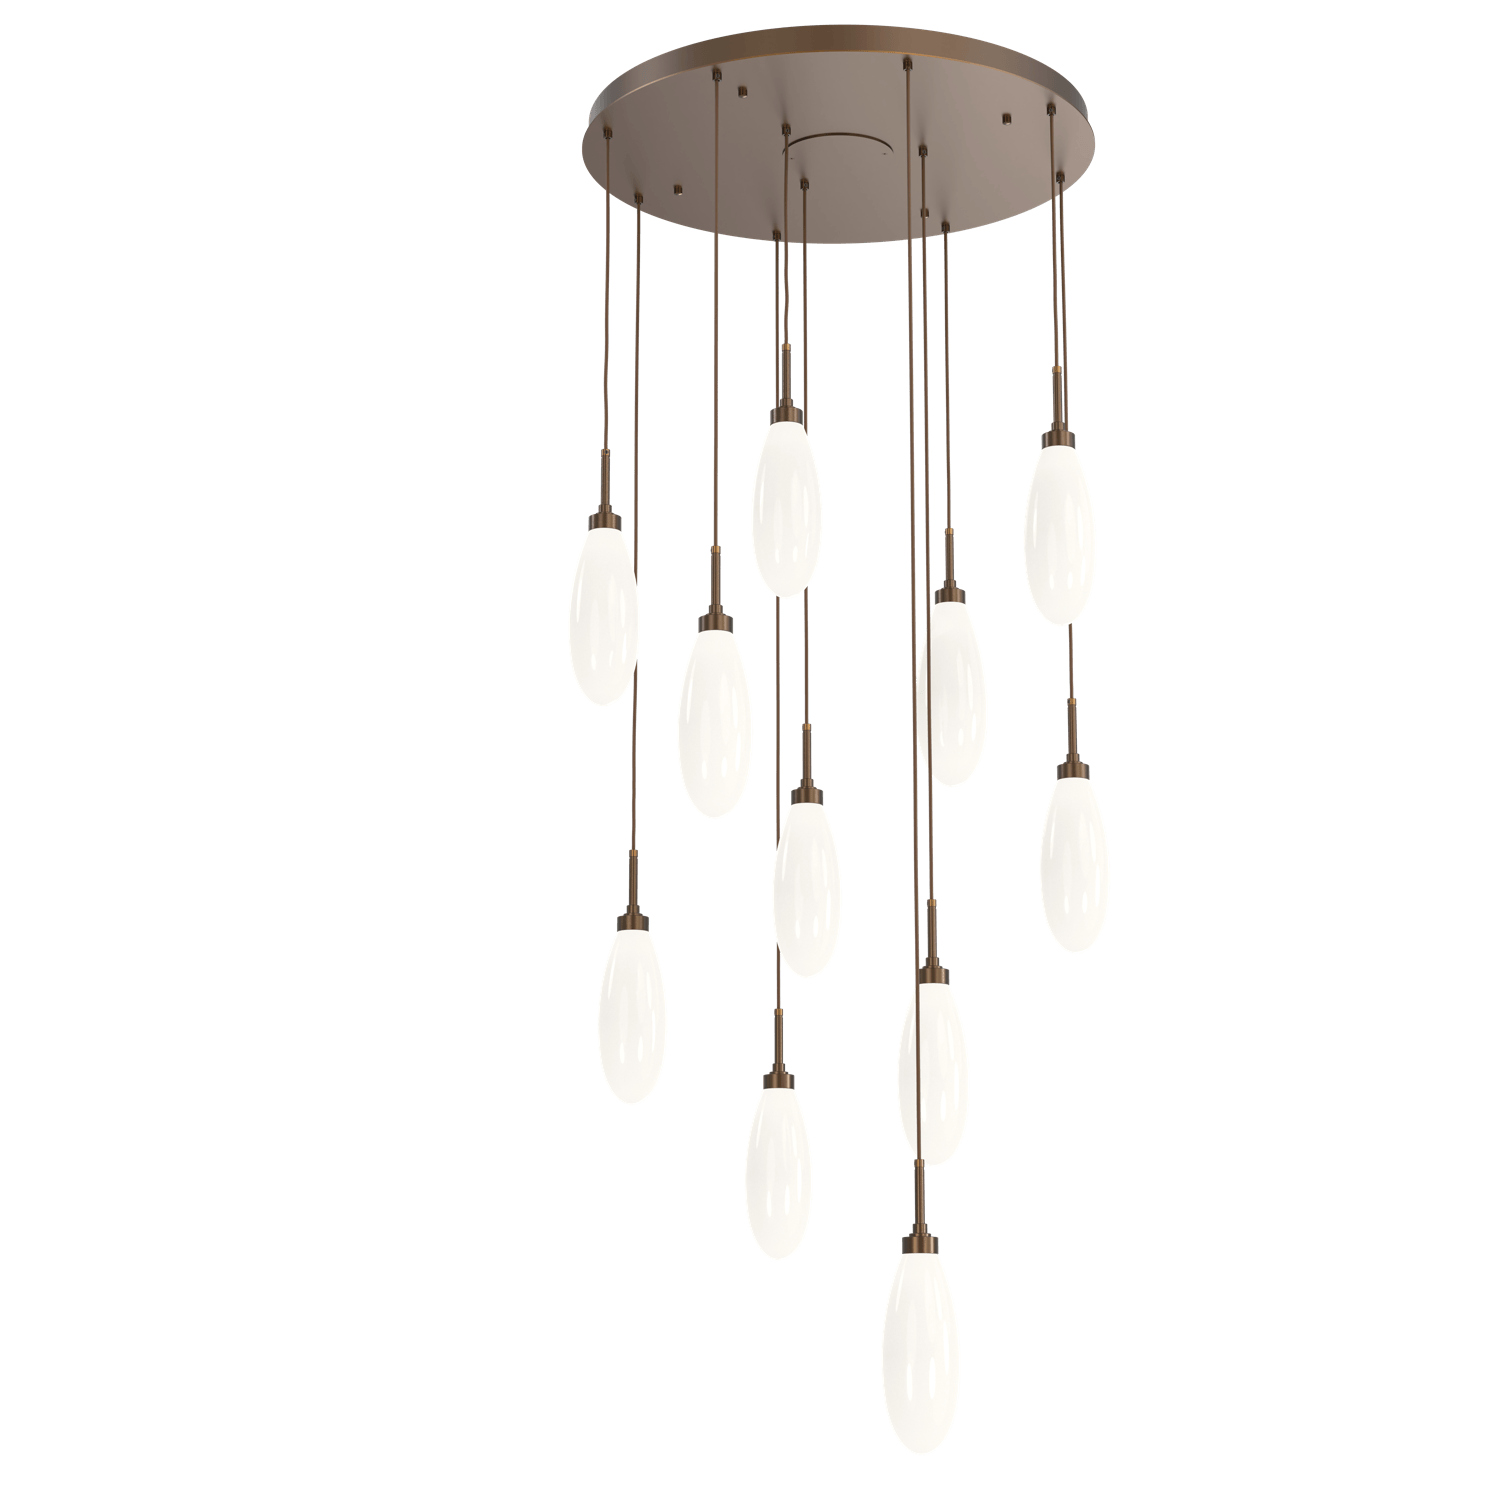 CHB0071-11-FB-WL-LL-Hammerton-Studio-Fiori-11-light-round-pendant-chandelier-with-flat-bronze-finish-and-opal-white-glass-shades-and-LED-lamping